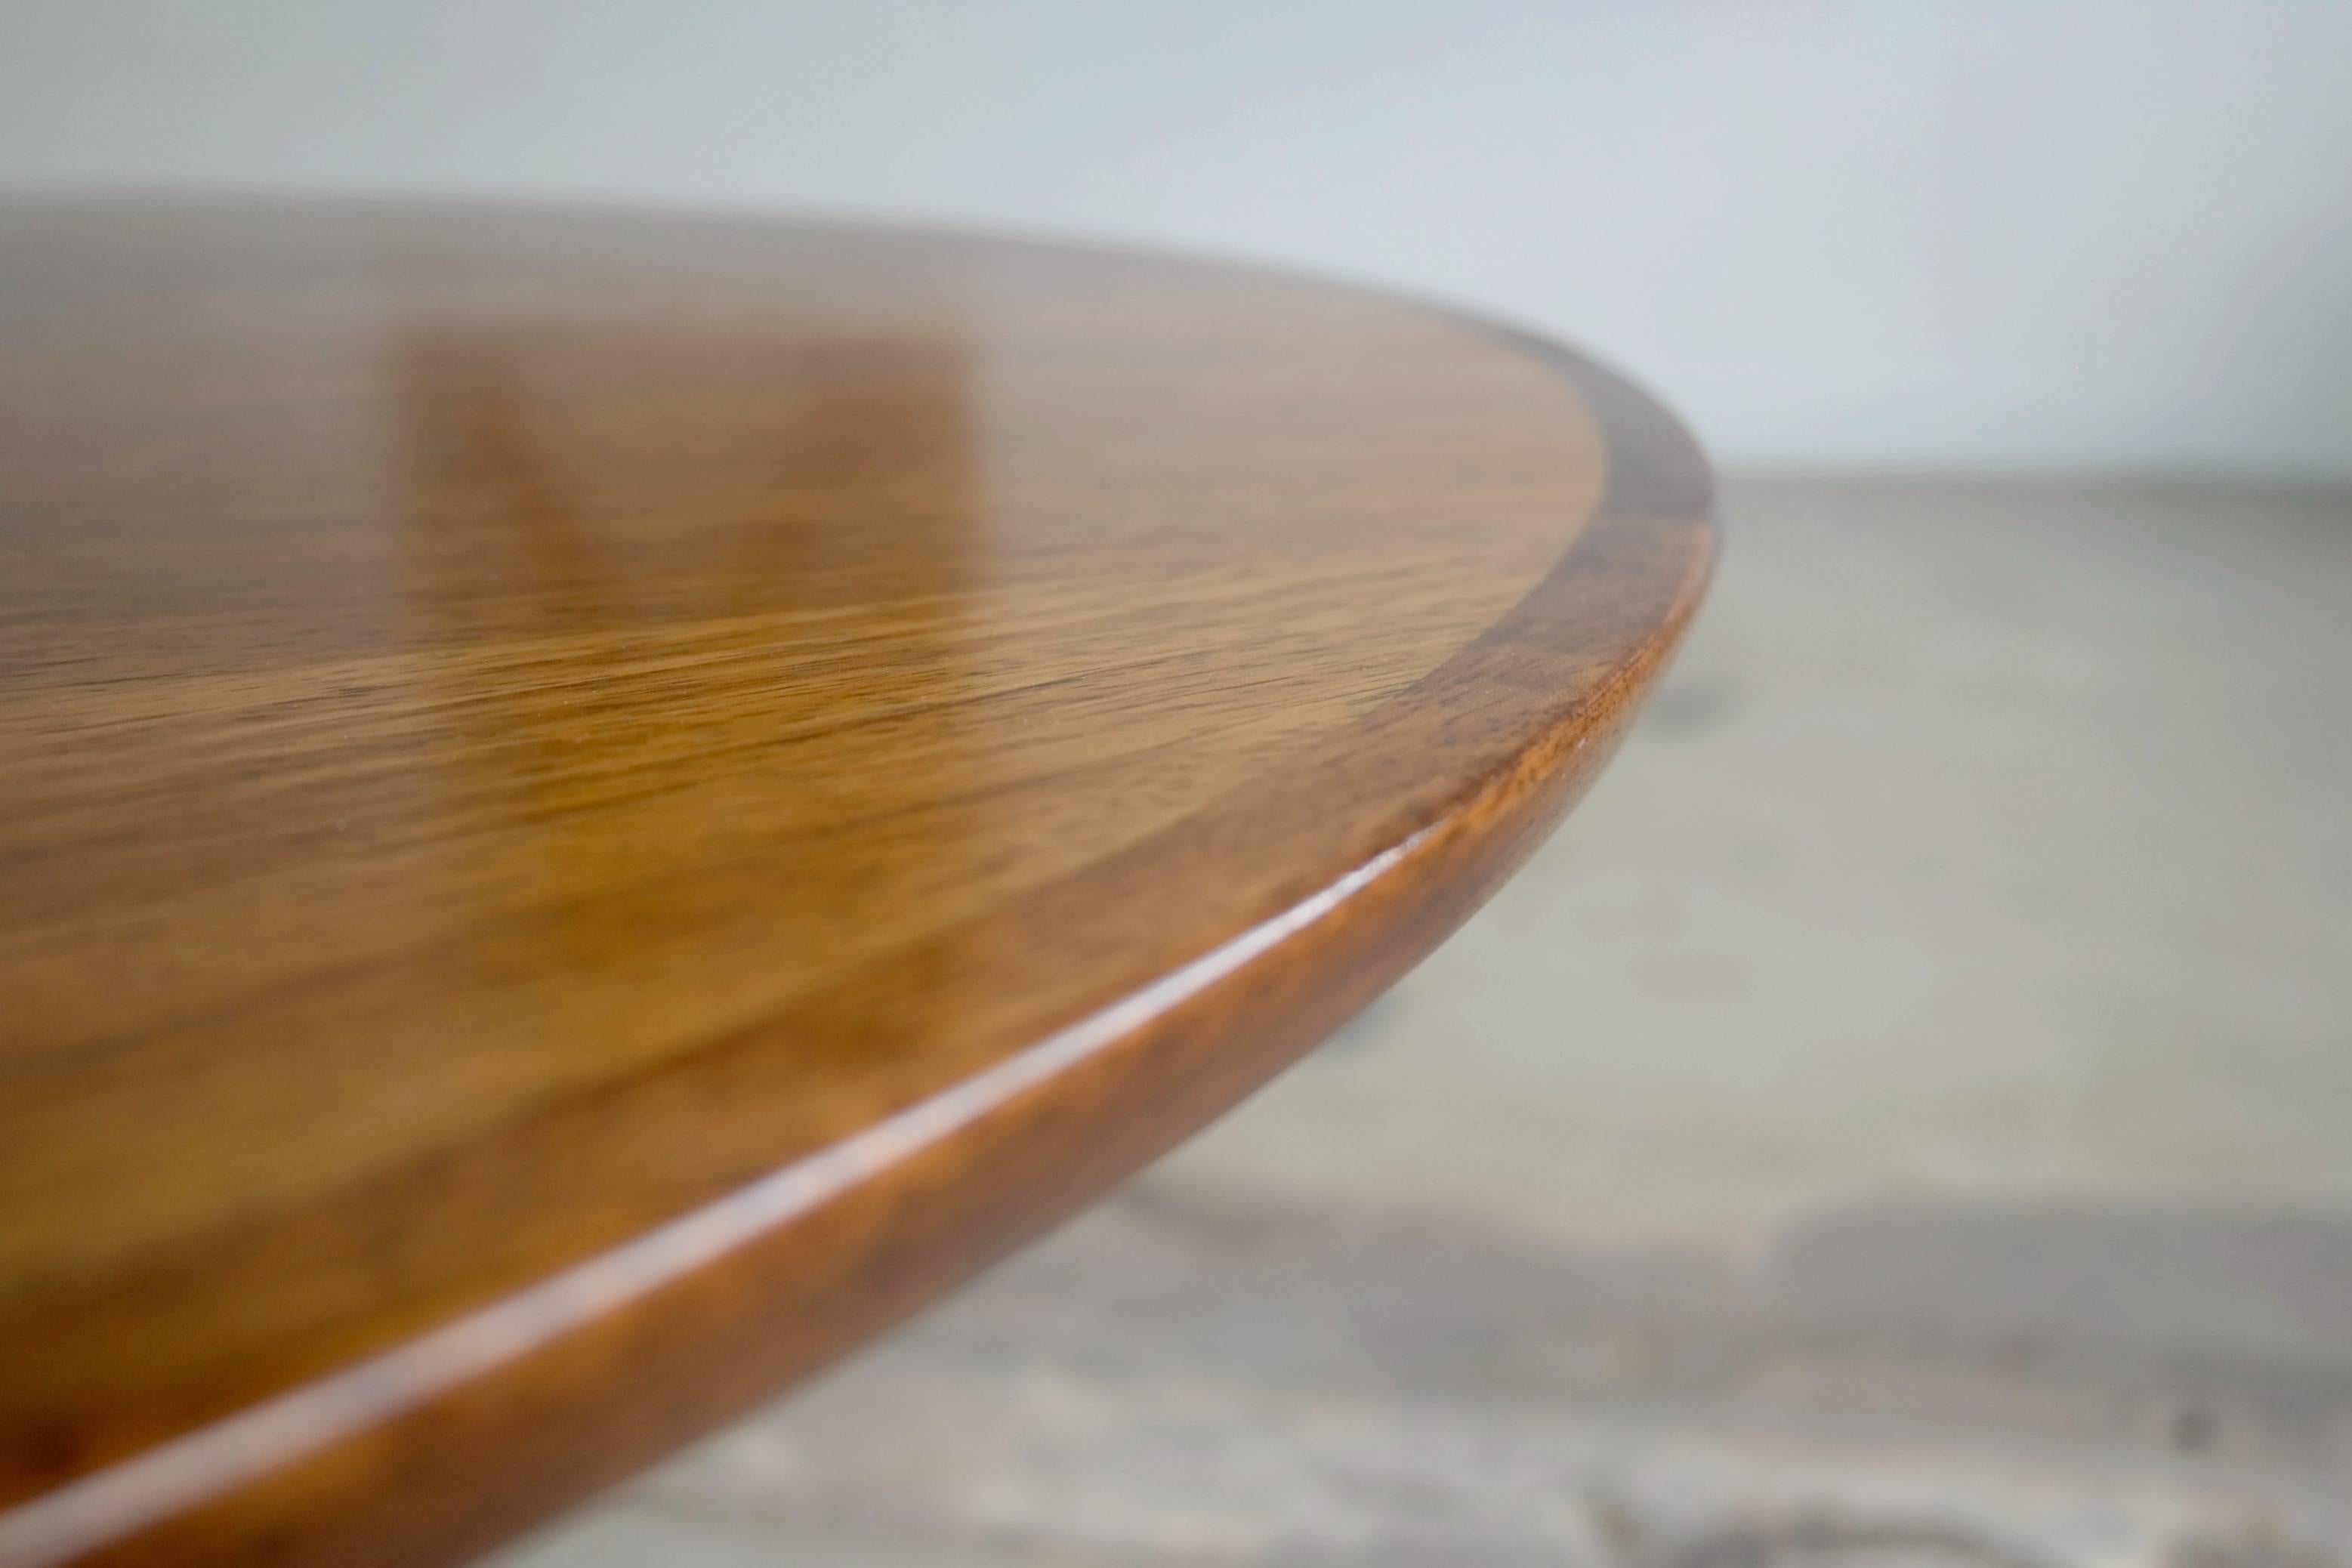 Round coffee table with a rosewood top and a brushed aluminum base designed by HW Klein for Bramin Mobler Denmark in the 1960s. The table is in excellent condition with some sun fading to the rosewood giving it a nice honey-golden color coveted by